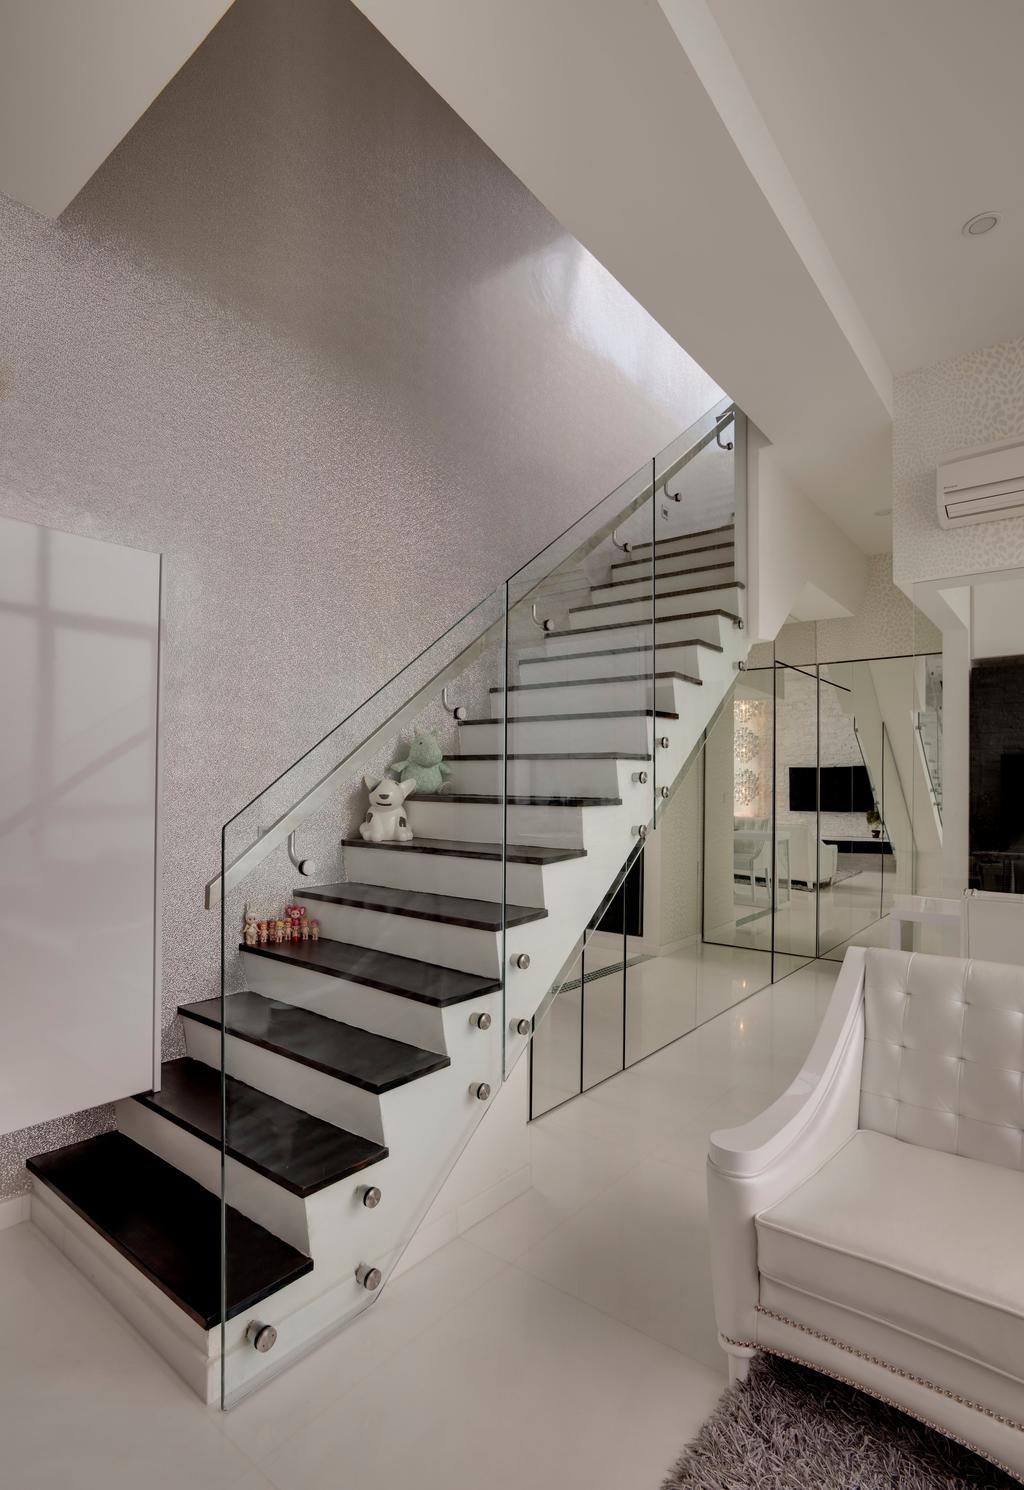 Modern, Condo, Living Room, Casa Fortuna, Interior Designer, Space Atelier, Stairs, White, Railing, Staircase, Mirror, Glass Railing, Wallpaper, Full Length Mirror, Rug, Quilted, Handrails, Marble Tiles, Sofa, Banister, Handrail, Bathroom, Indoors, Interior Design, Room